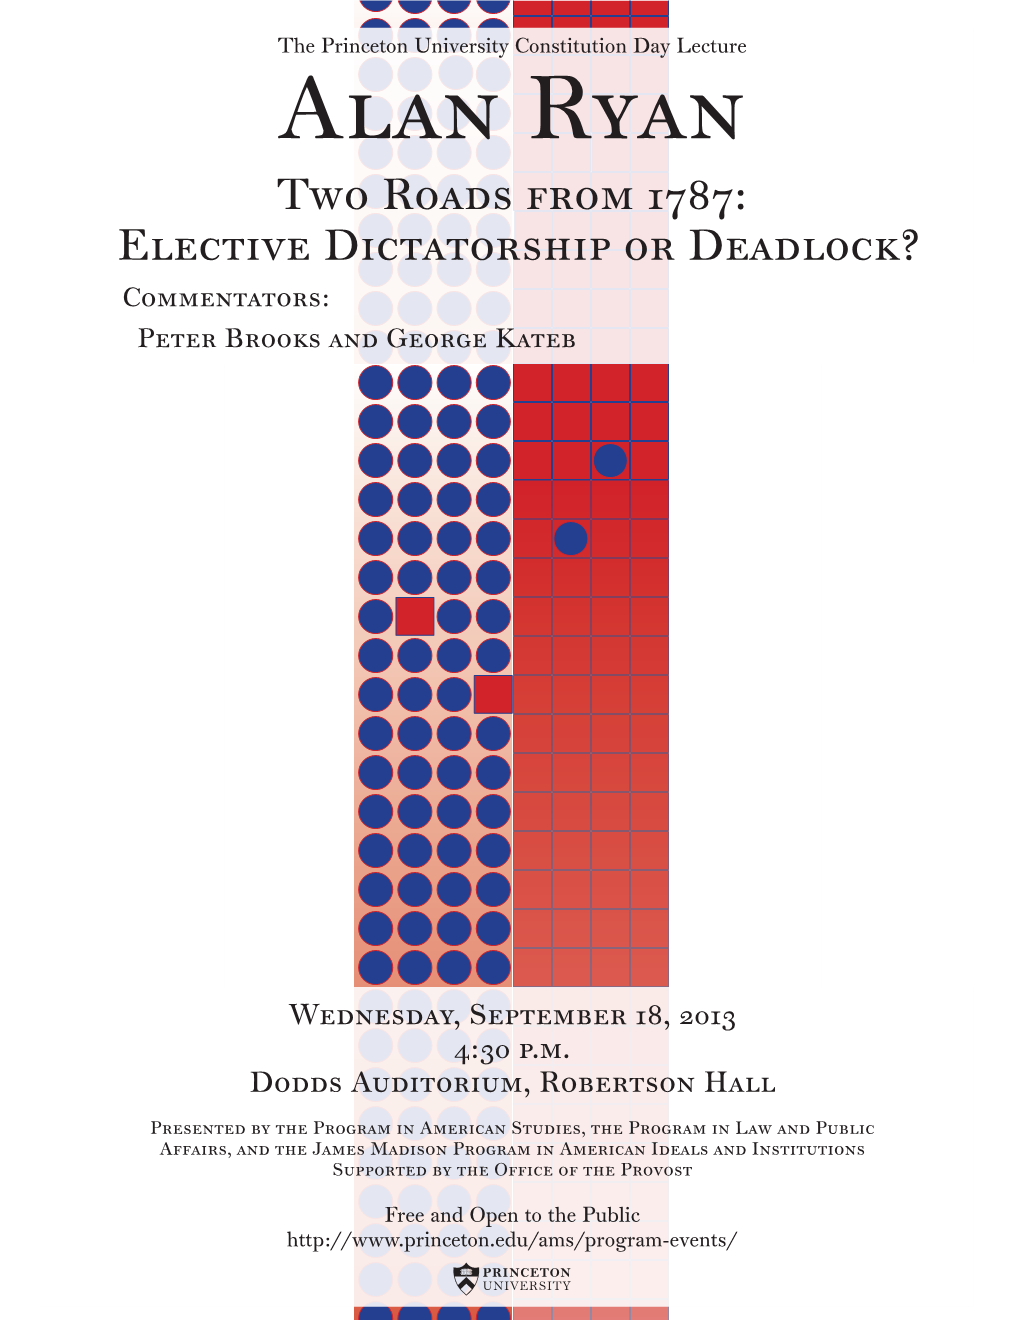 Alan Ryan Two Roads from 1787: Elective Dictatorship Or Deadlock? Commentators: Peter Brooks and George Kateb